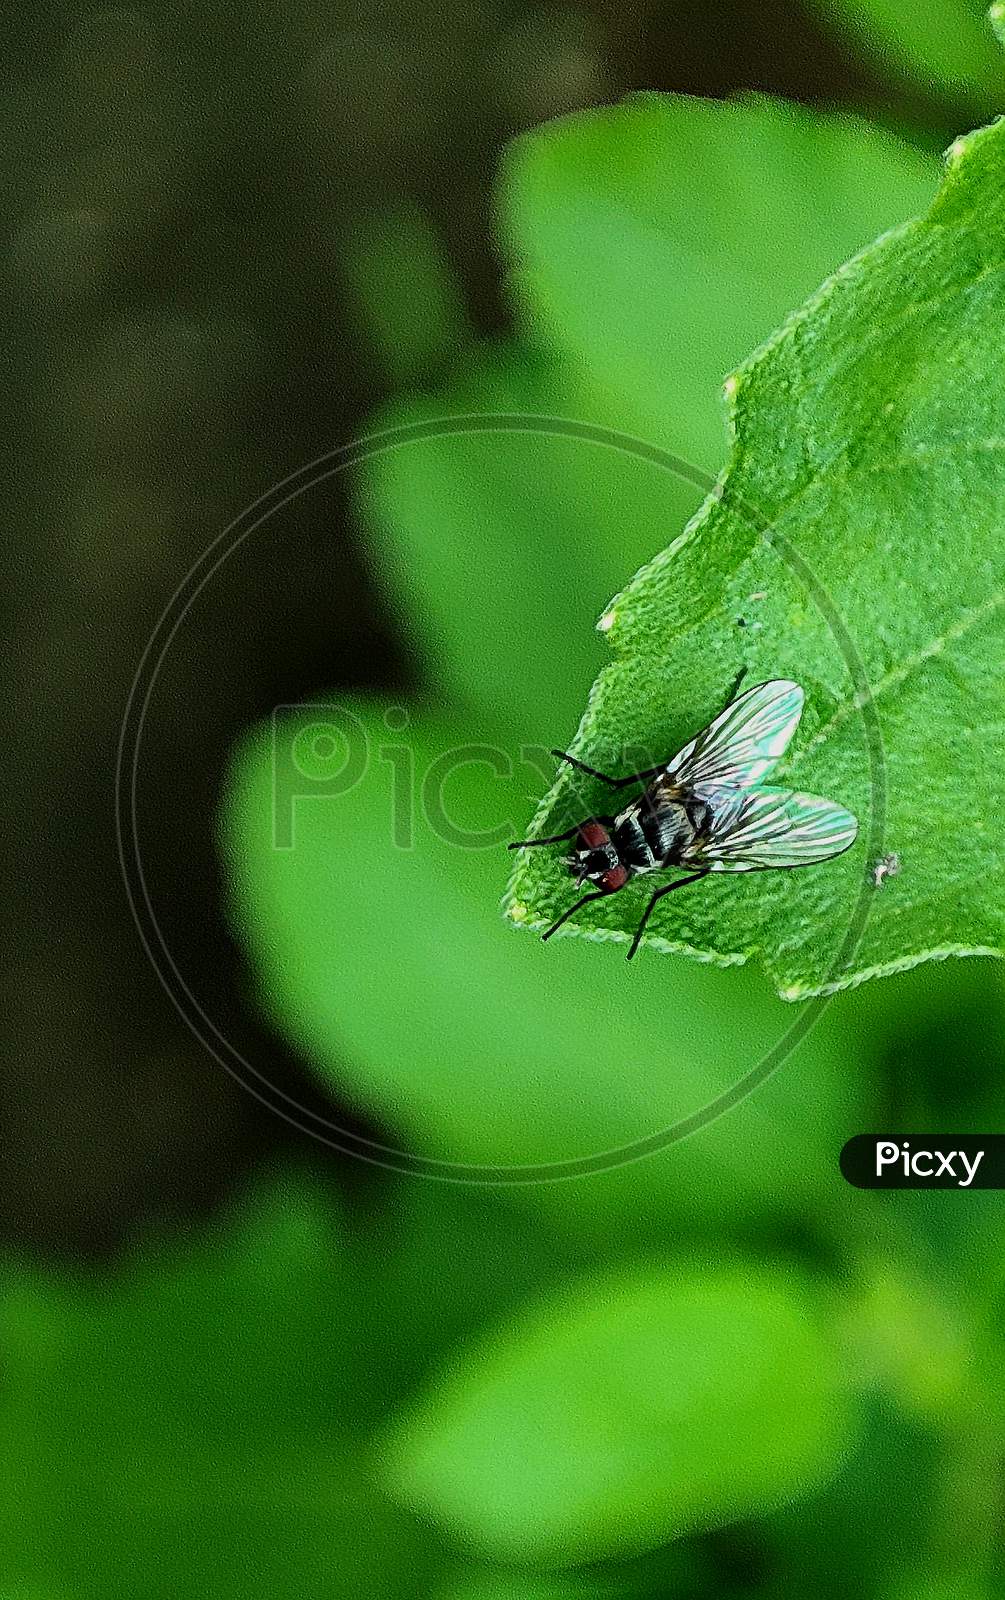 Close Up Picture Of A House Fly On A Green Leaf.